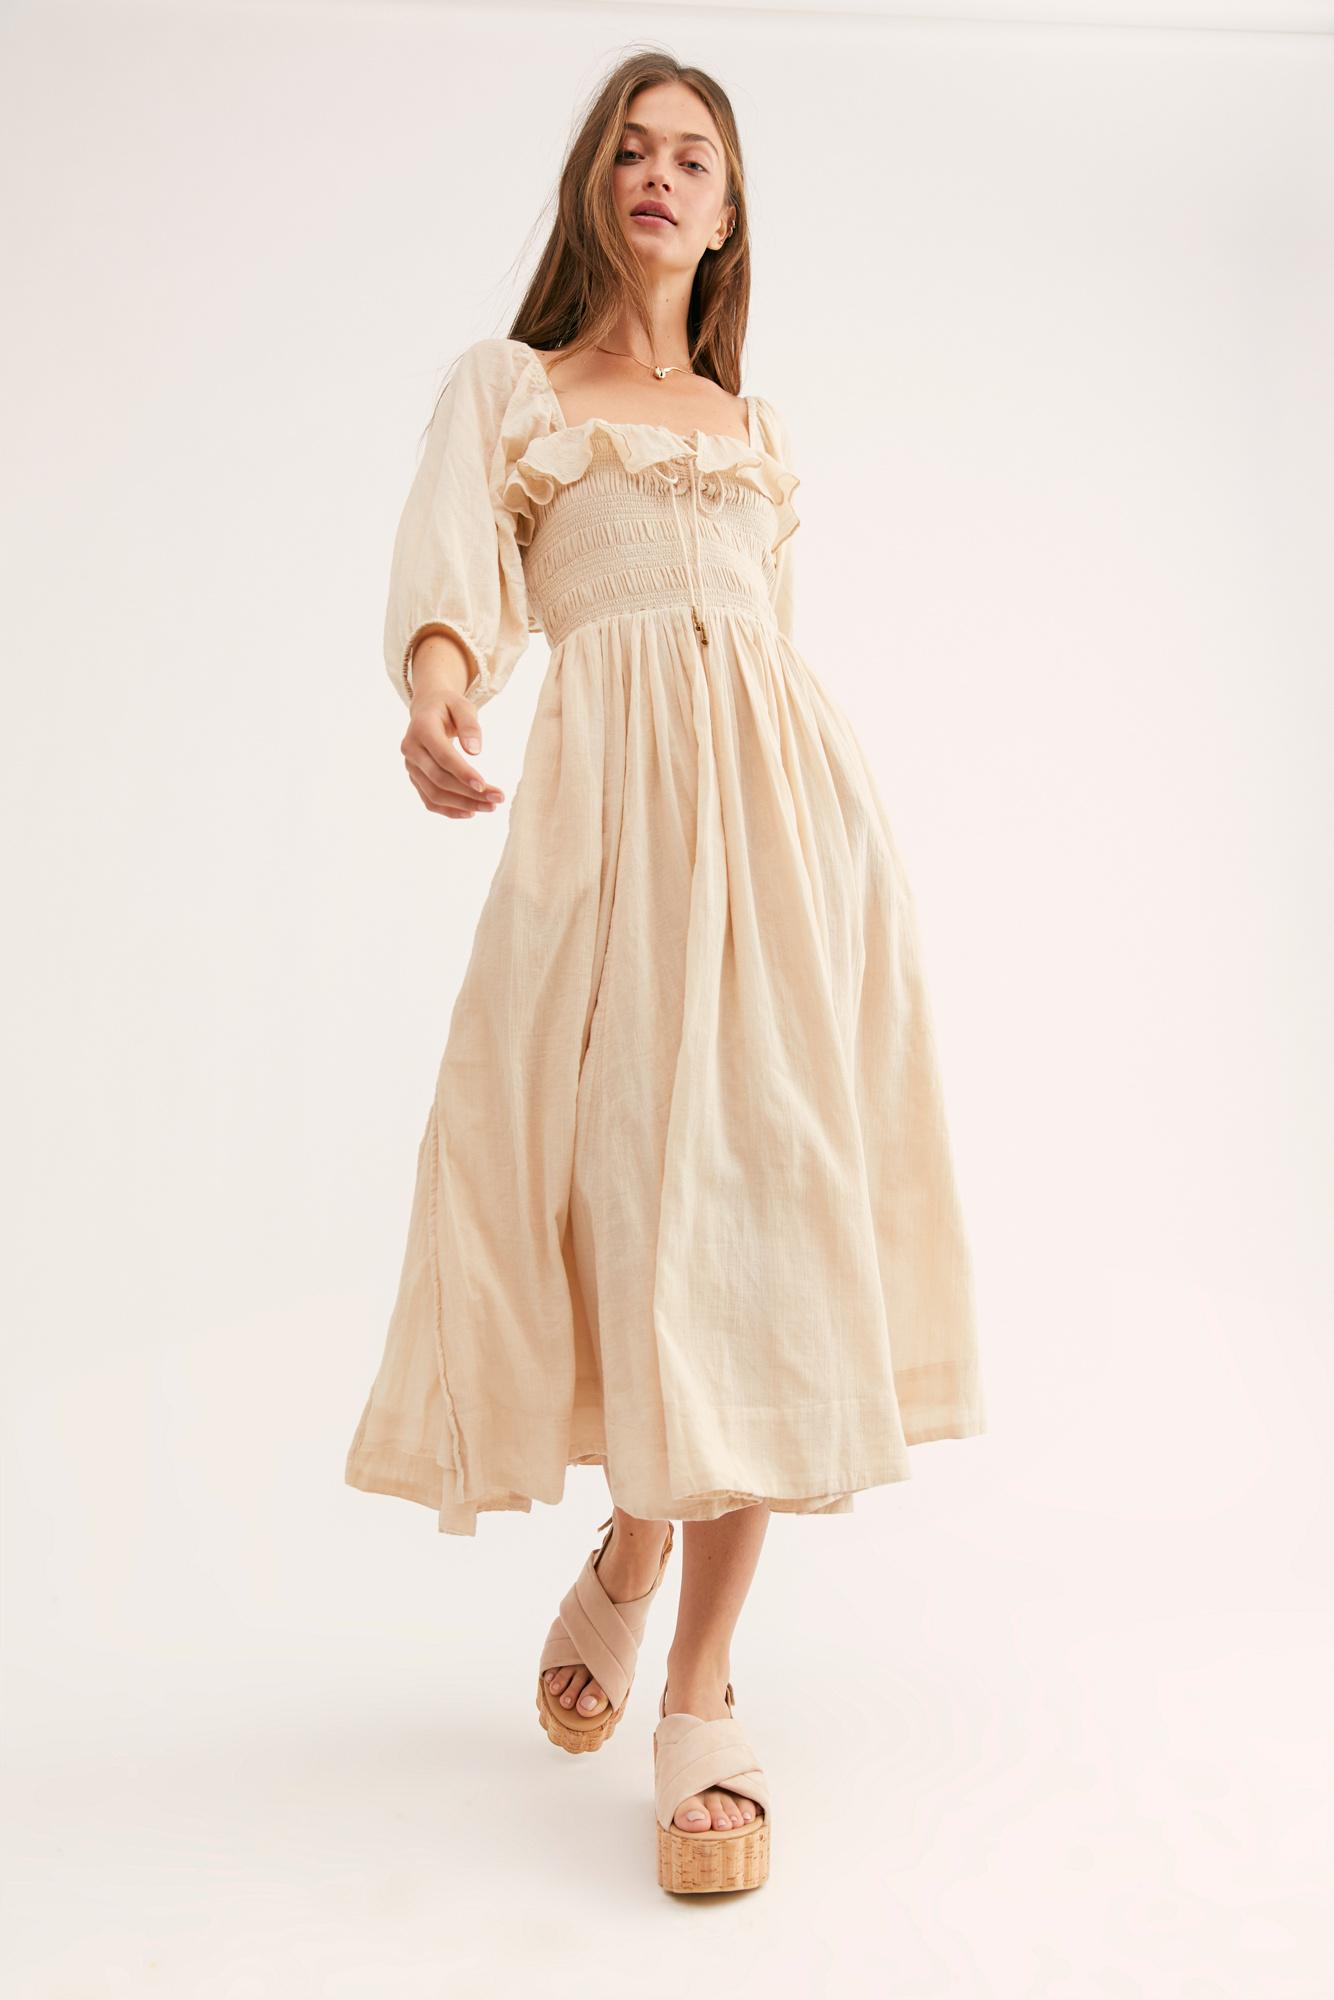 Free People Oasis Midi Dress in Natural | Lyst